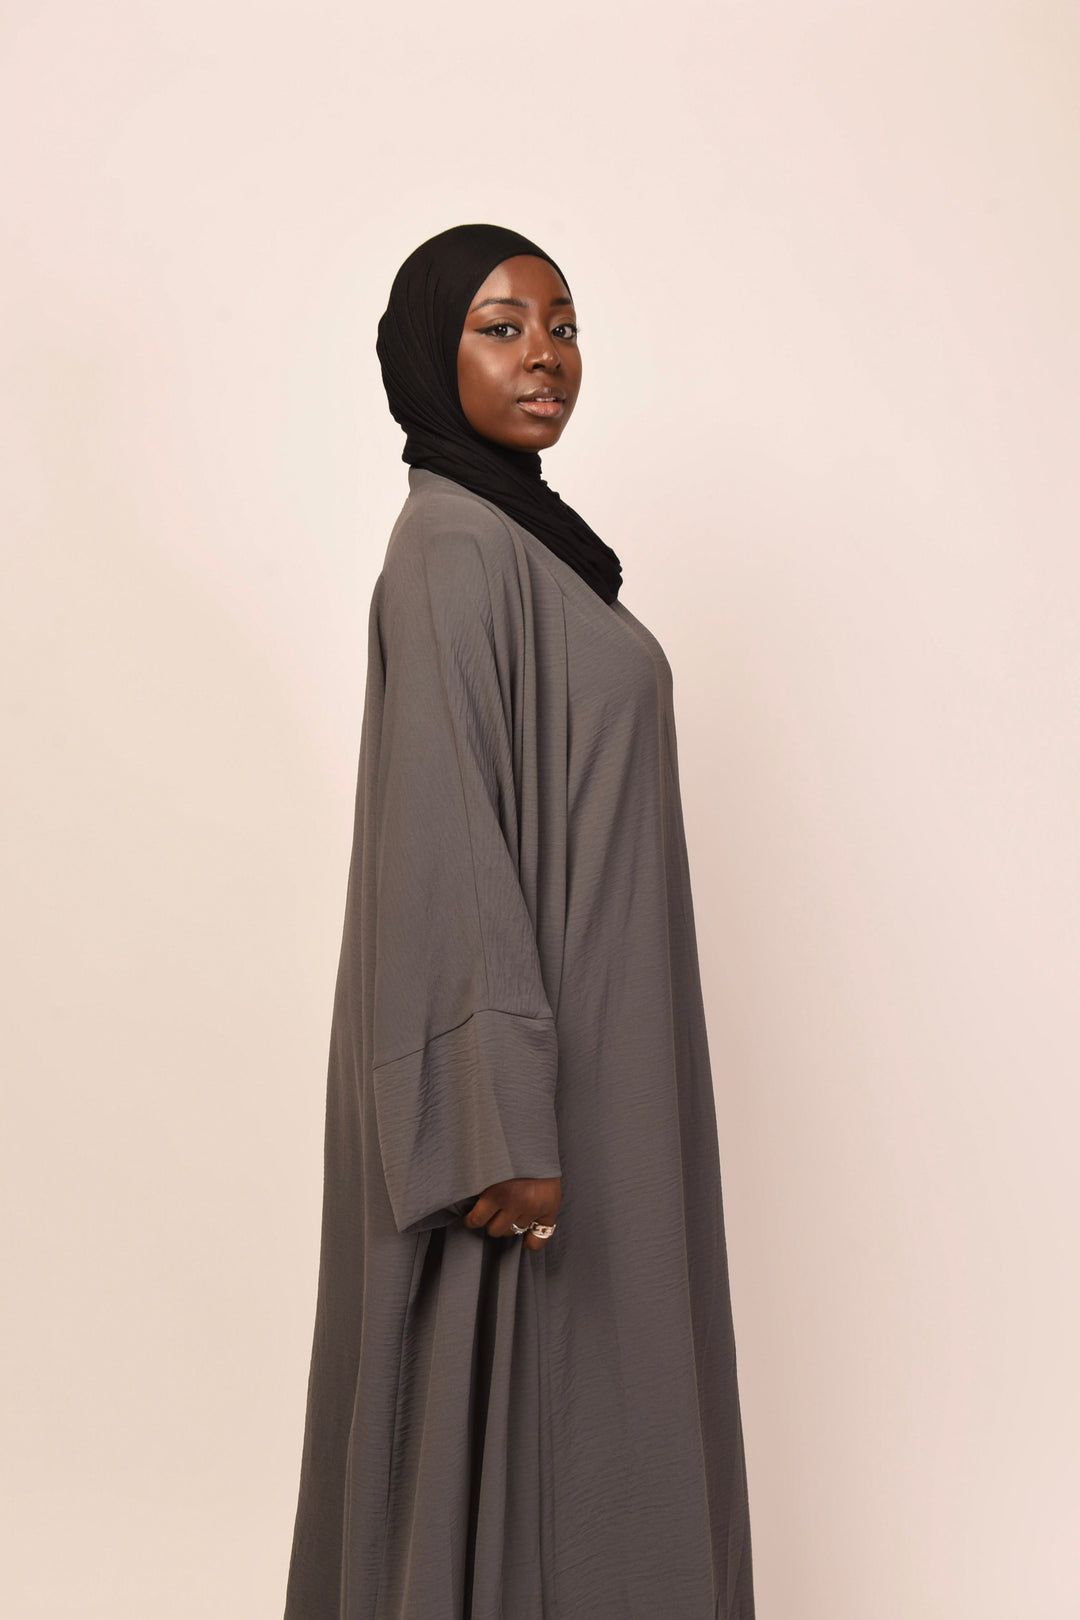 Get trendy with Lea 2-Piece Abaya Set - Gray -  available at Voilee NY. Grab yours for $74.90 today!